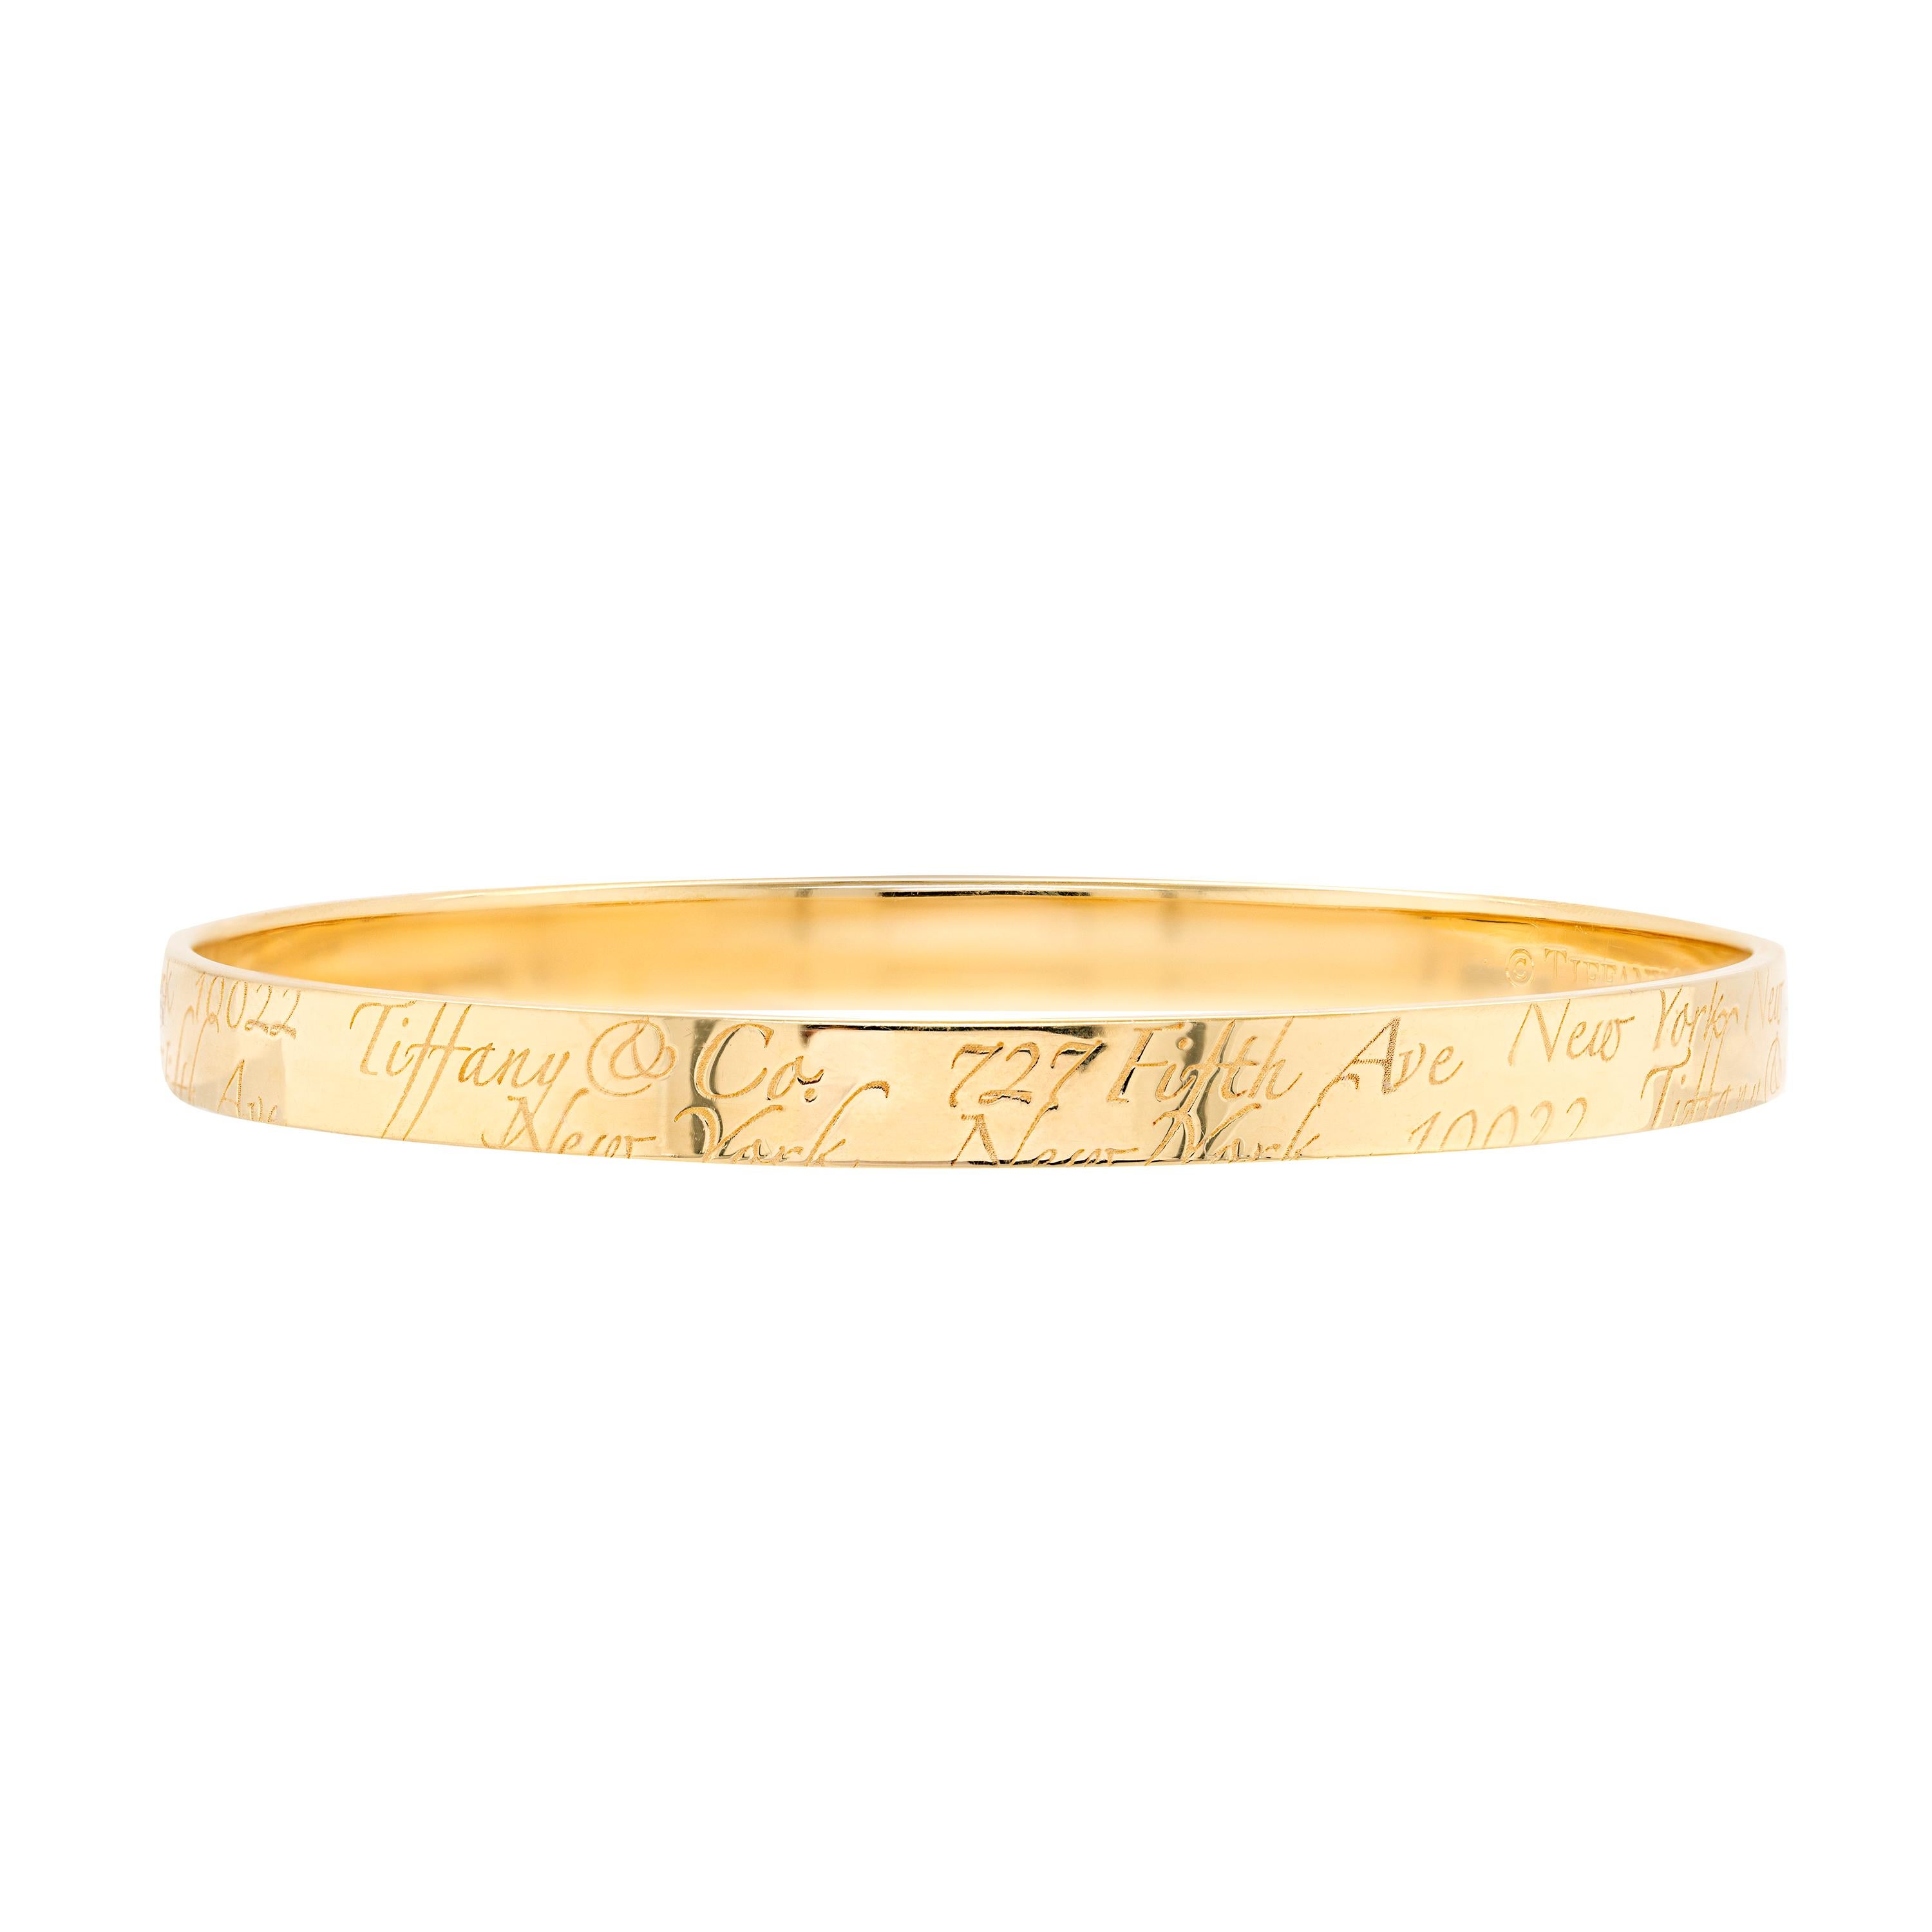 Tiffany & Co solid gold bangle engraved Tiffany & Co 727 Fifth Avenue New York 10022 in script throughout. The bangle weighs a total of 26 grams, measures 5.8mm in width and has an approximate circumference of 7.5 inches. Stamped TIFFANY & CO. 750.